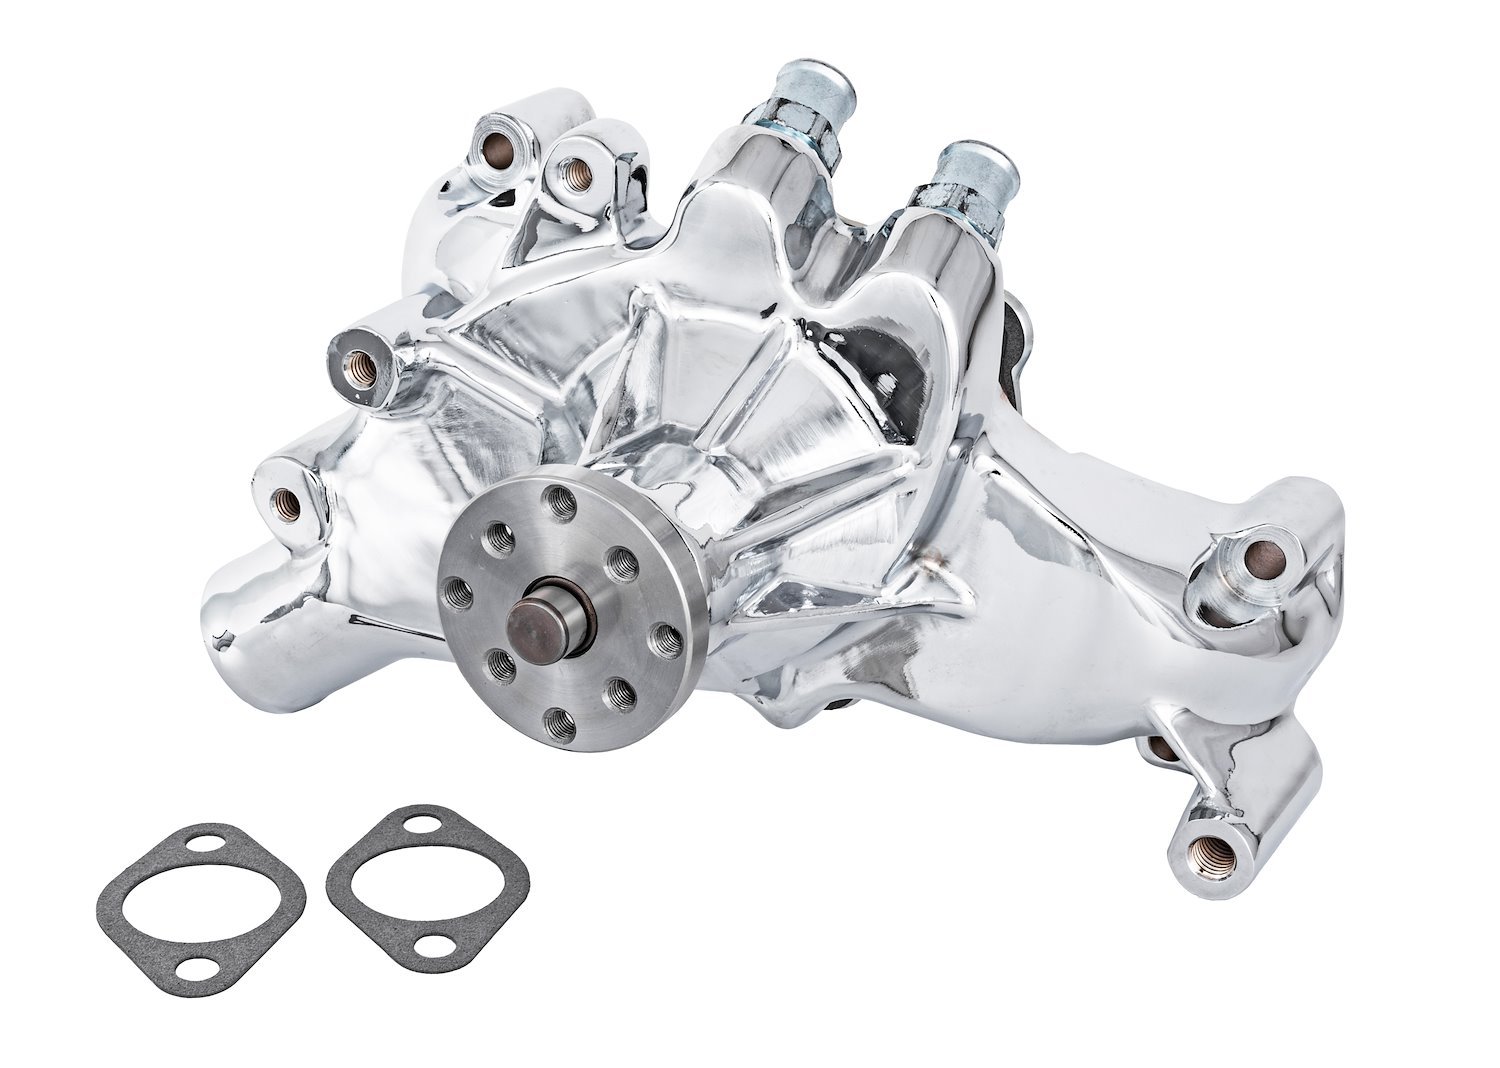 OEM-Style Water Pump for Big Block Chevy [Long, Chrome Finish]